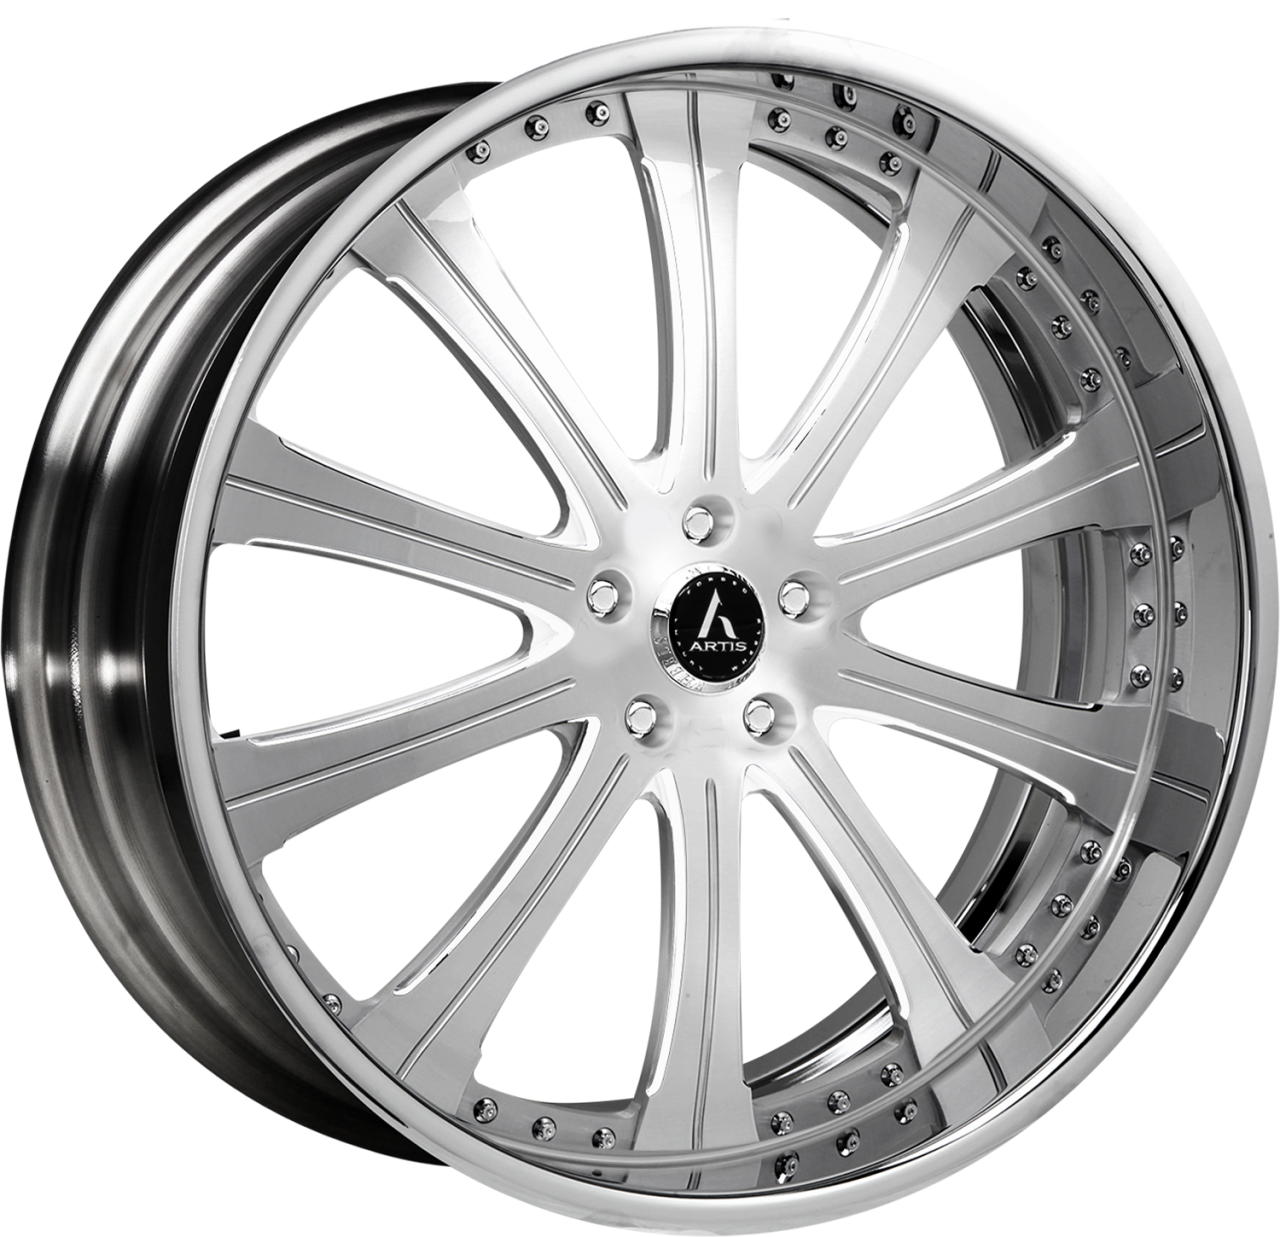 Artis Forged Oak Cliff-M wheel with Brushed finish